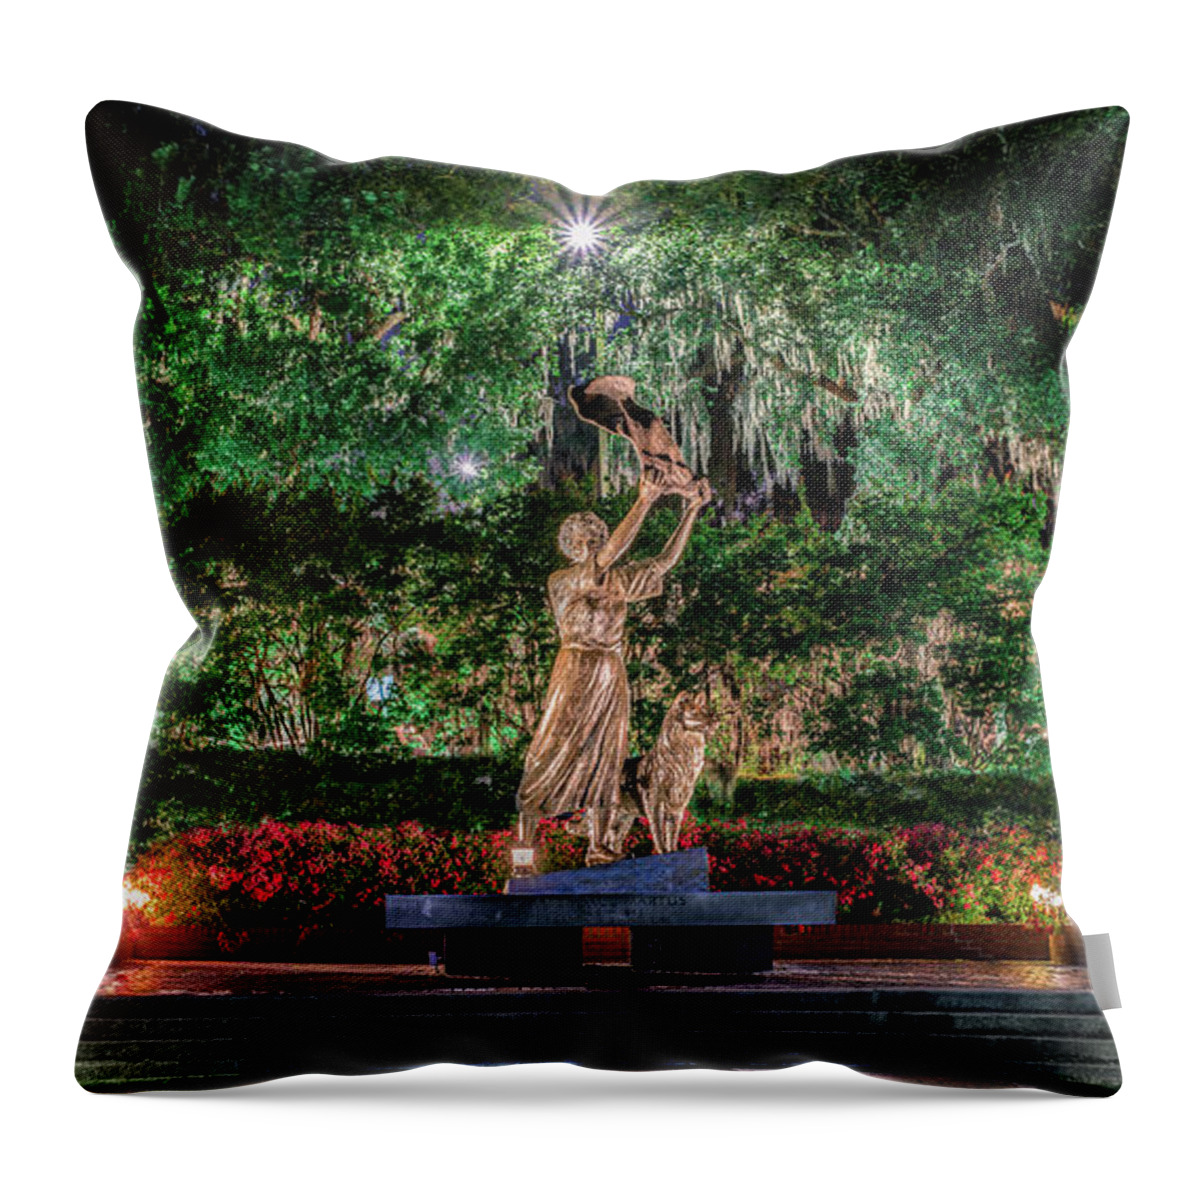 East River Throw Pillow featuring the photograph The Waving Girl by Traveler's Pics